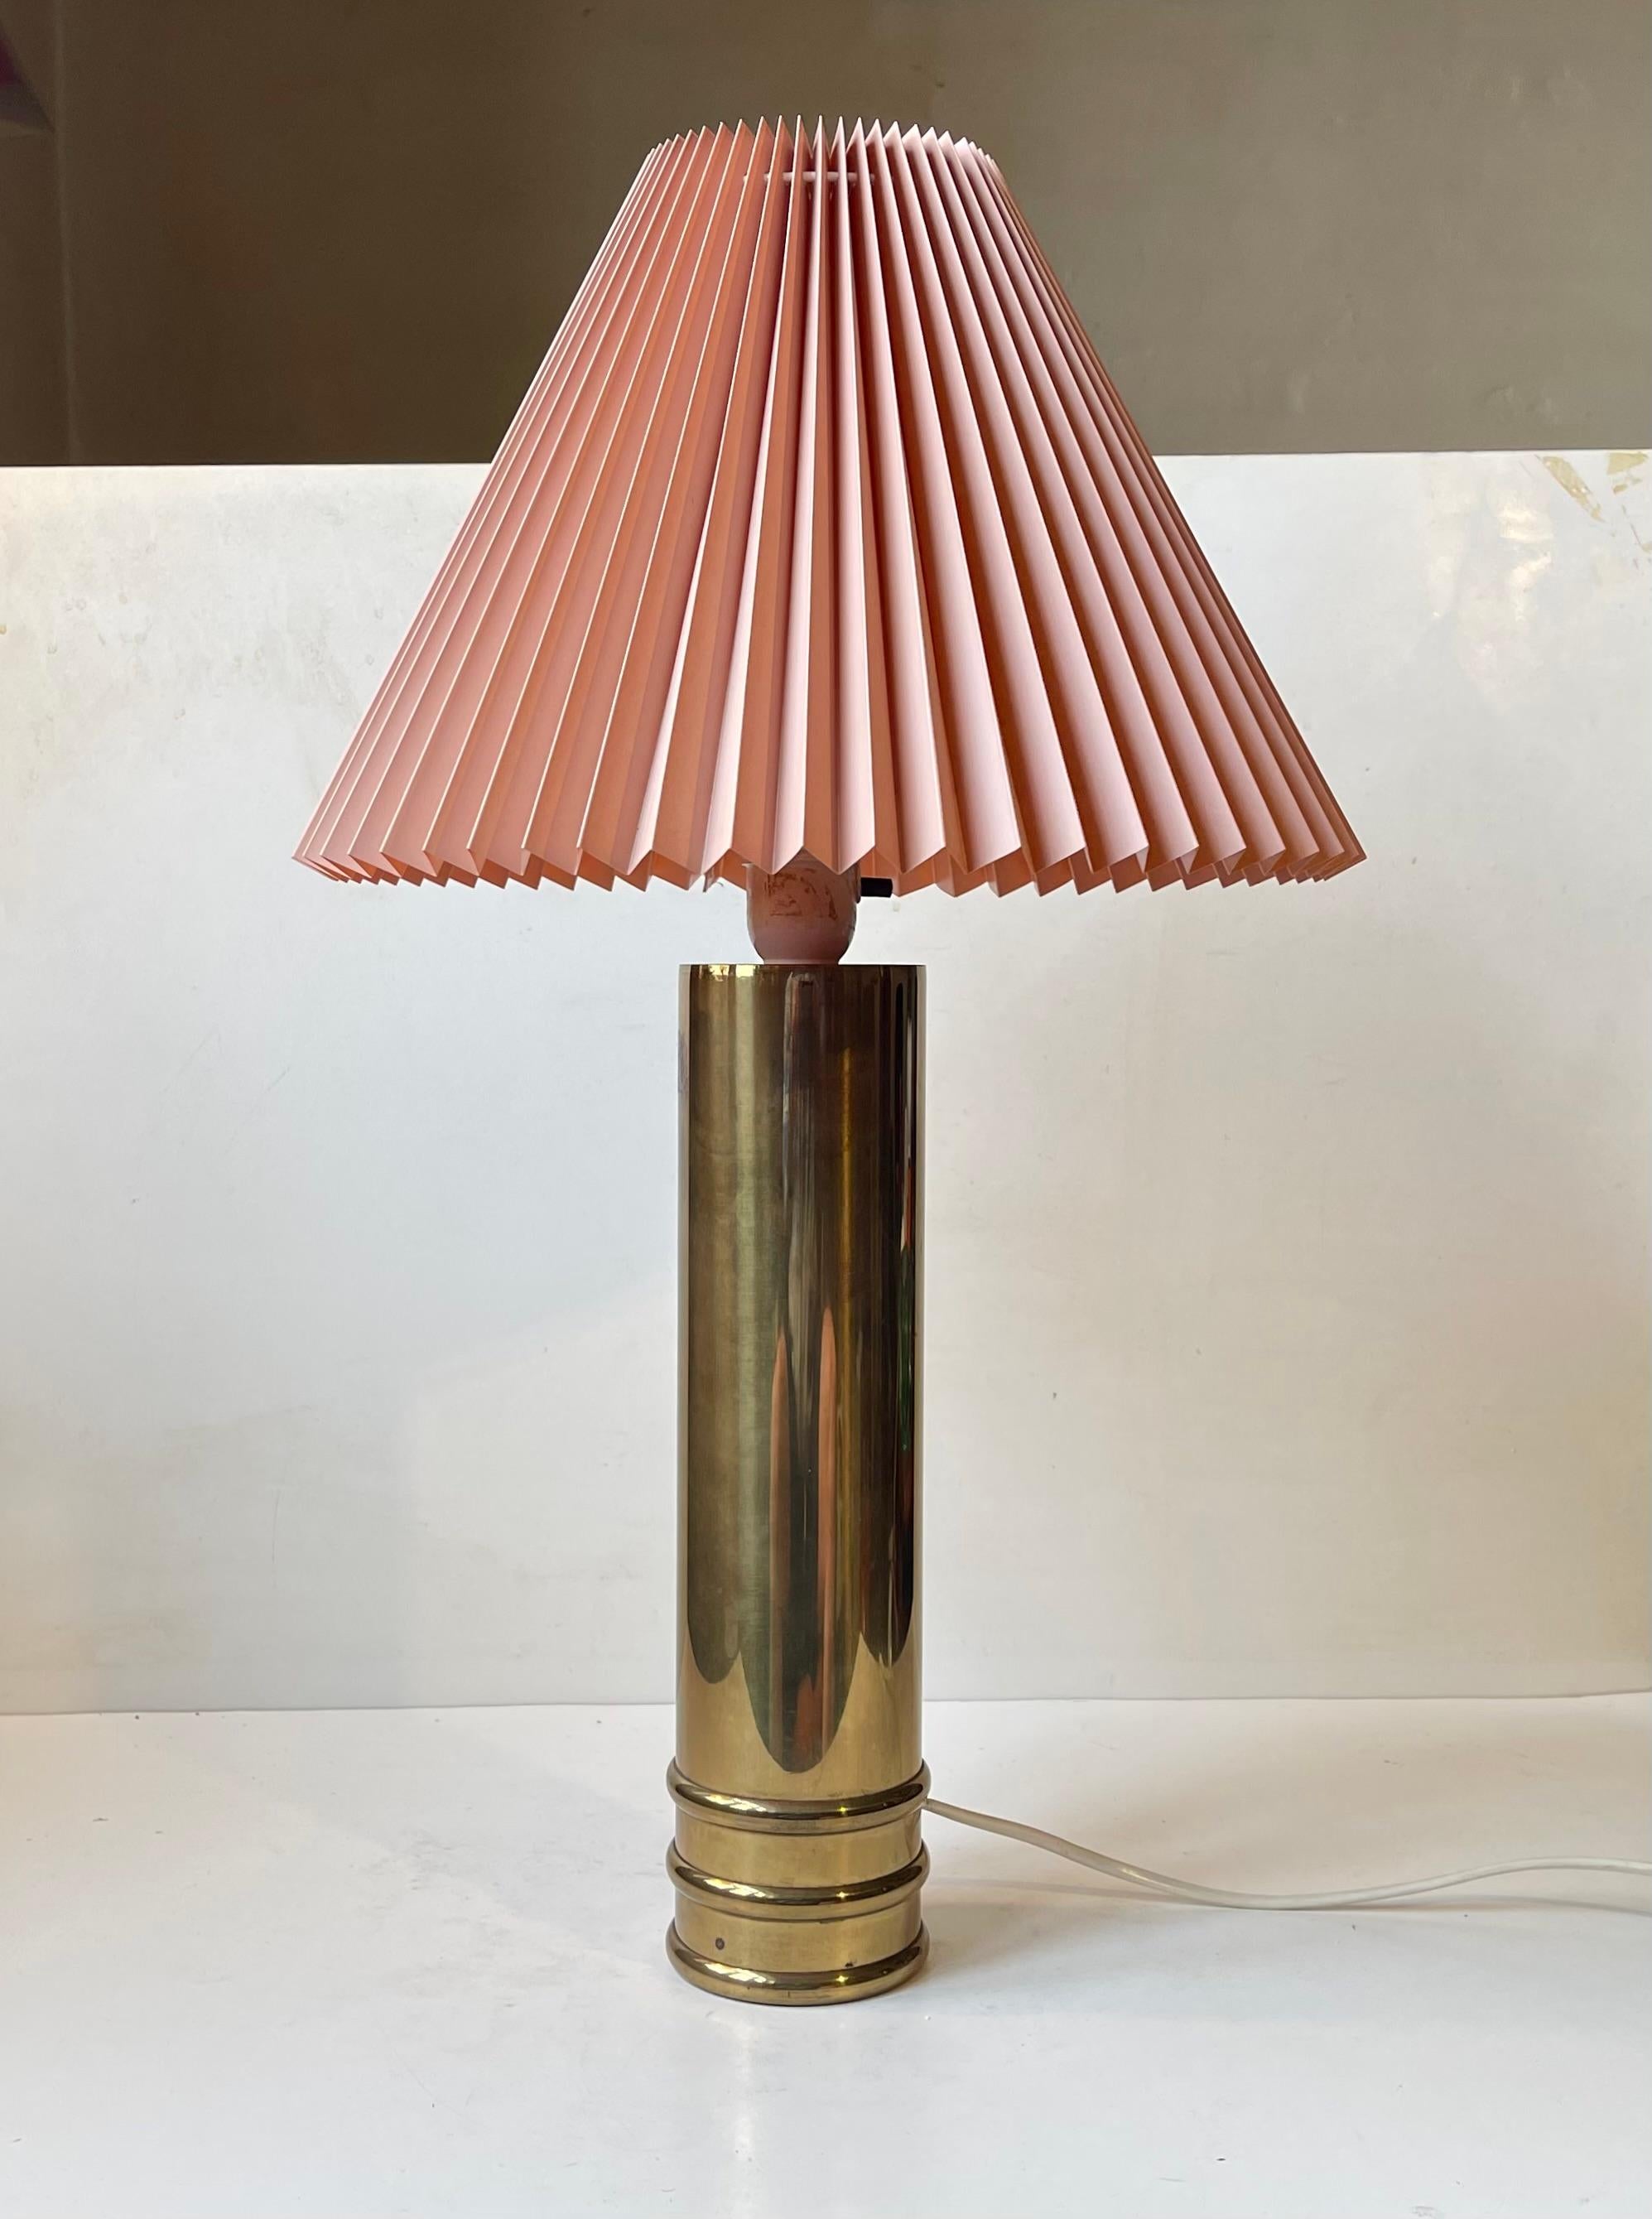 Elegant cylindrical table lamp executed in solid brass and featuring a fluted face-powder-pink lamp shade in paper/textile. Designed and manufactured by Bergboms in Sweden circa 1960-68. The version model B09 are more commonly seen in white marble.